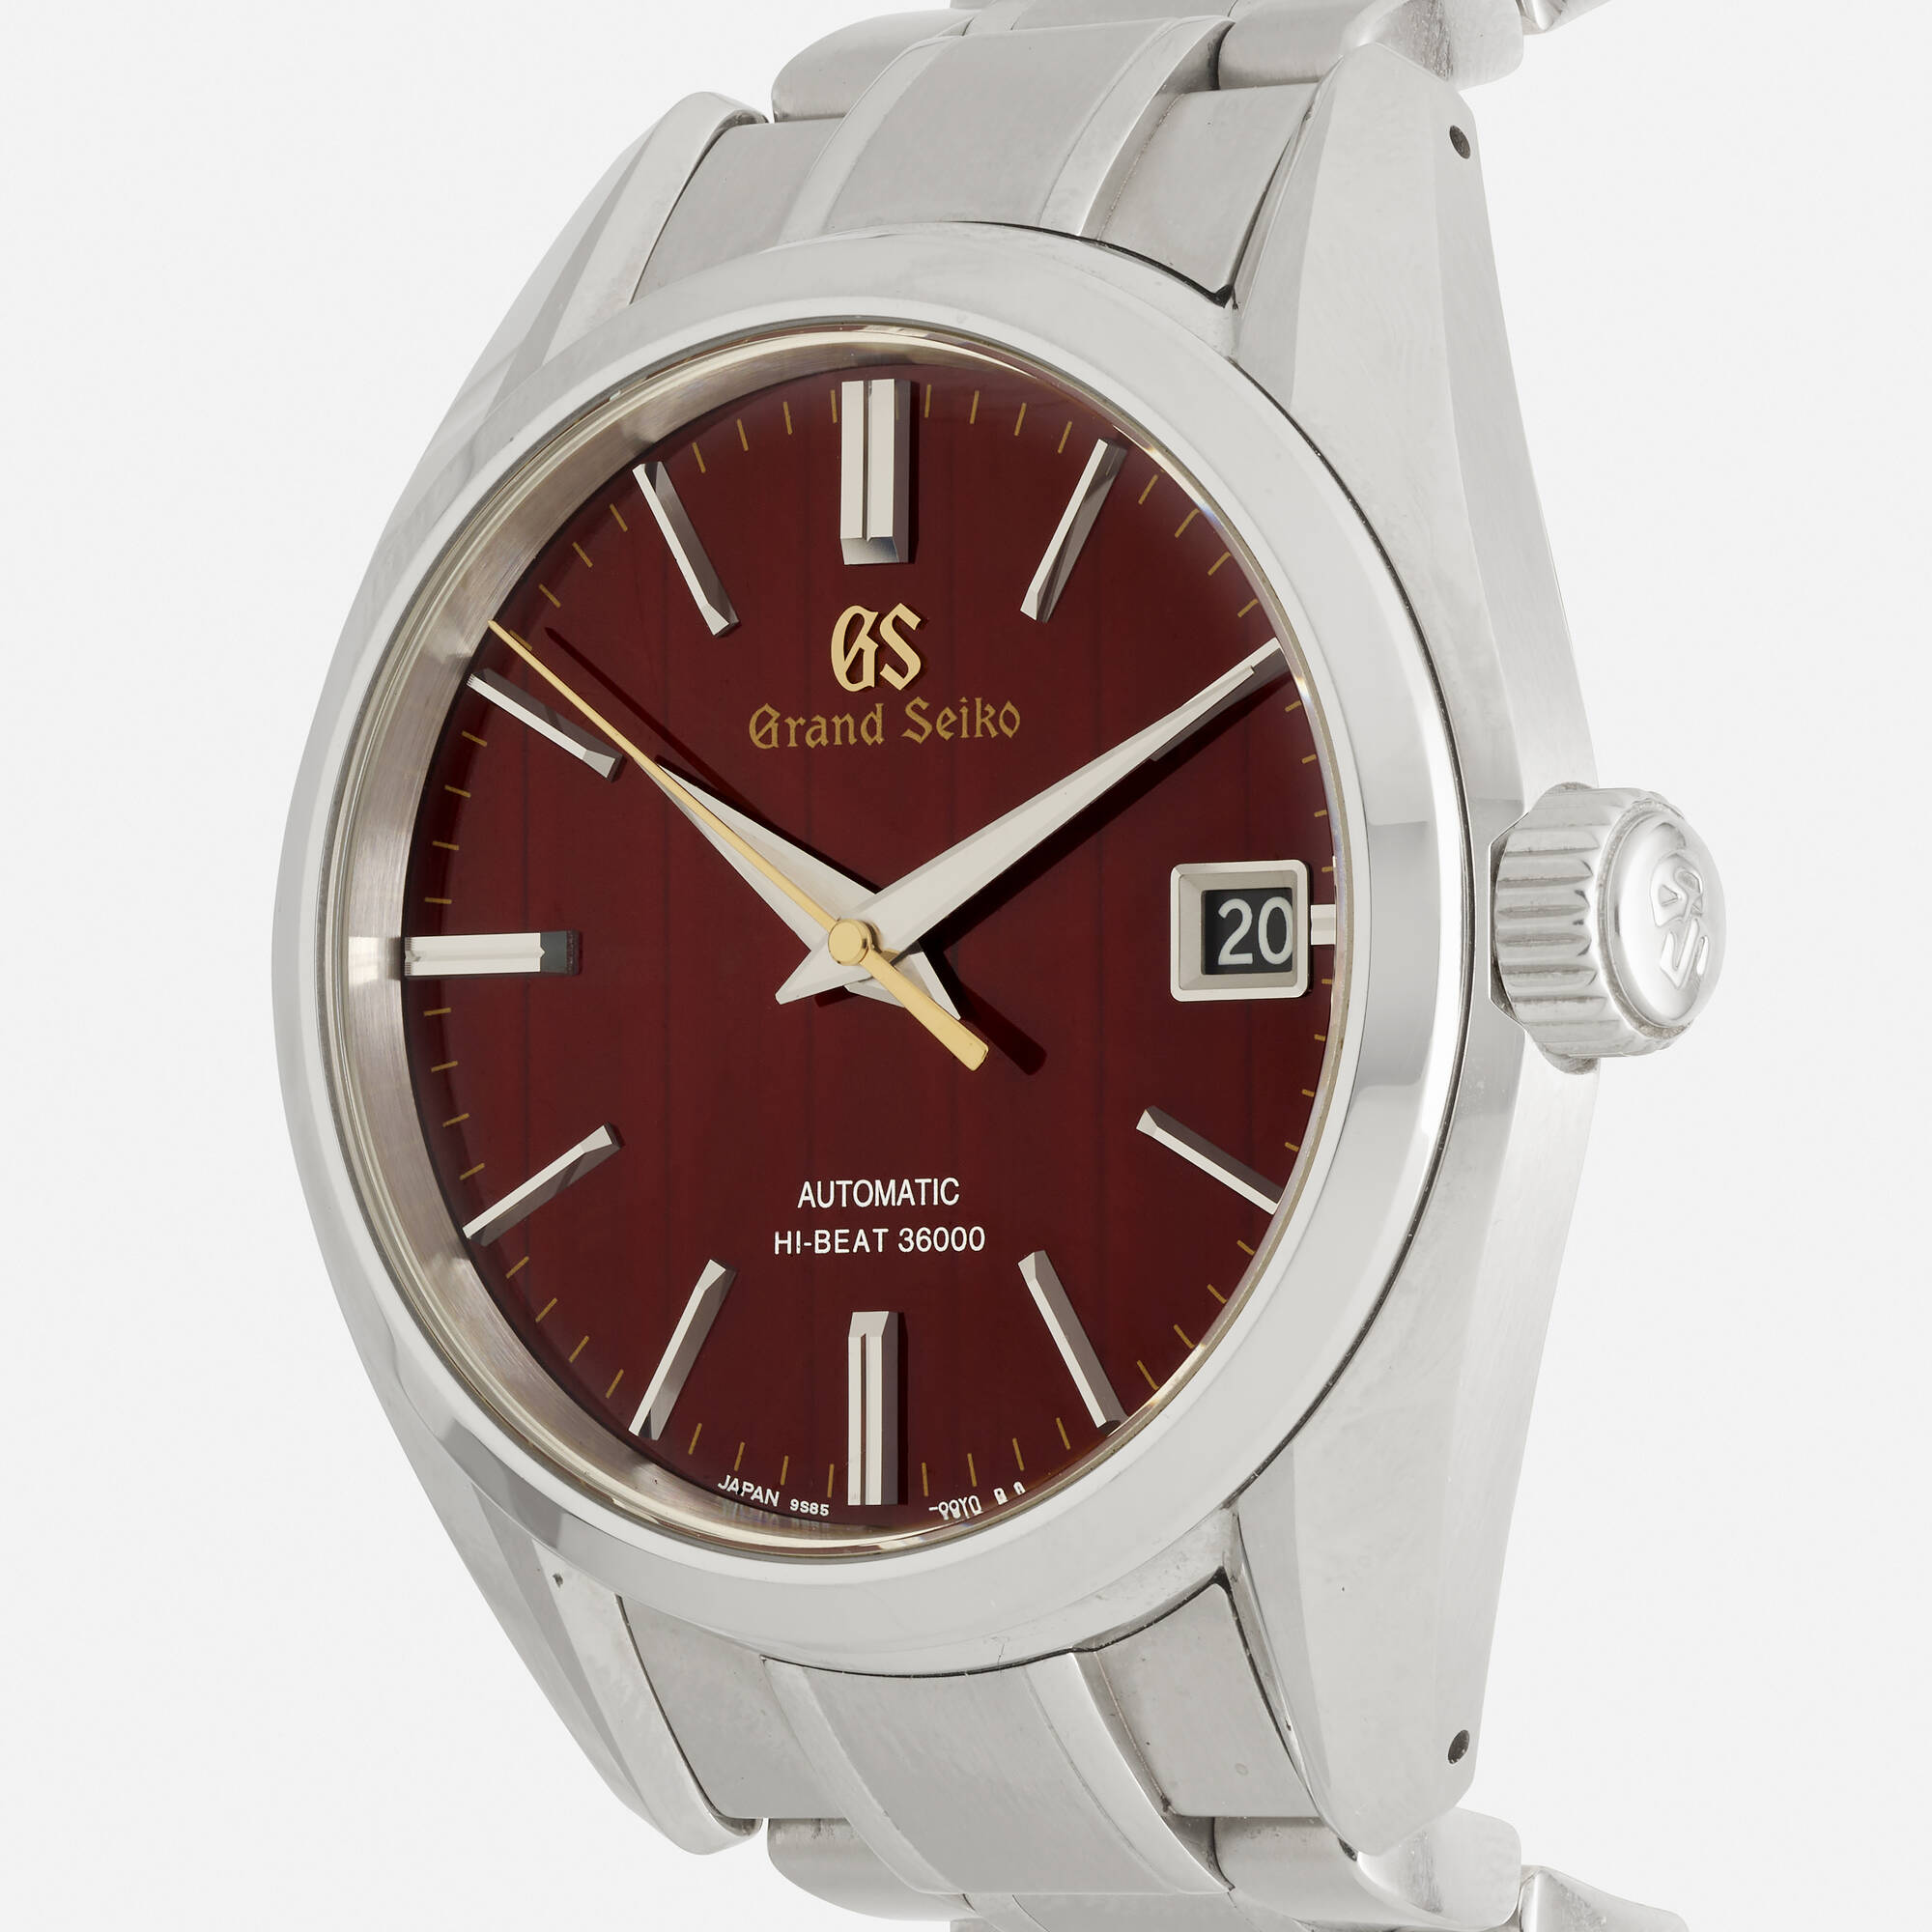 113: GRAND SEIKO, 'Seasons Autumn' stainless steel wristwatch, Ref. SBGH269  < Watches, 29 June 2022 < Auctions | Rago Auctions